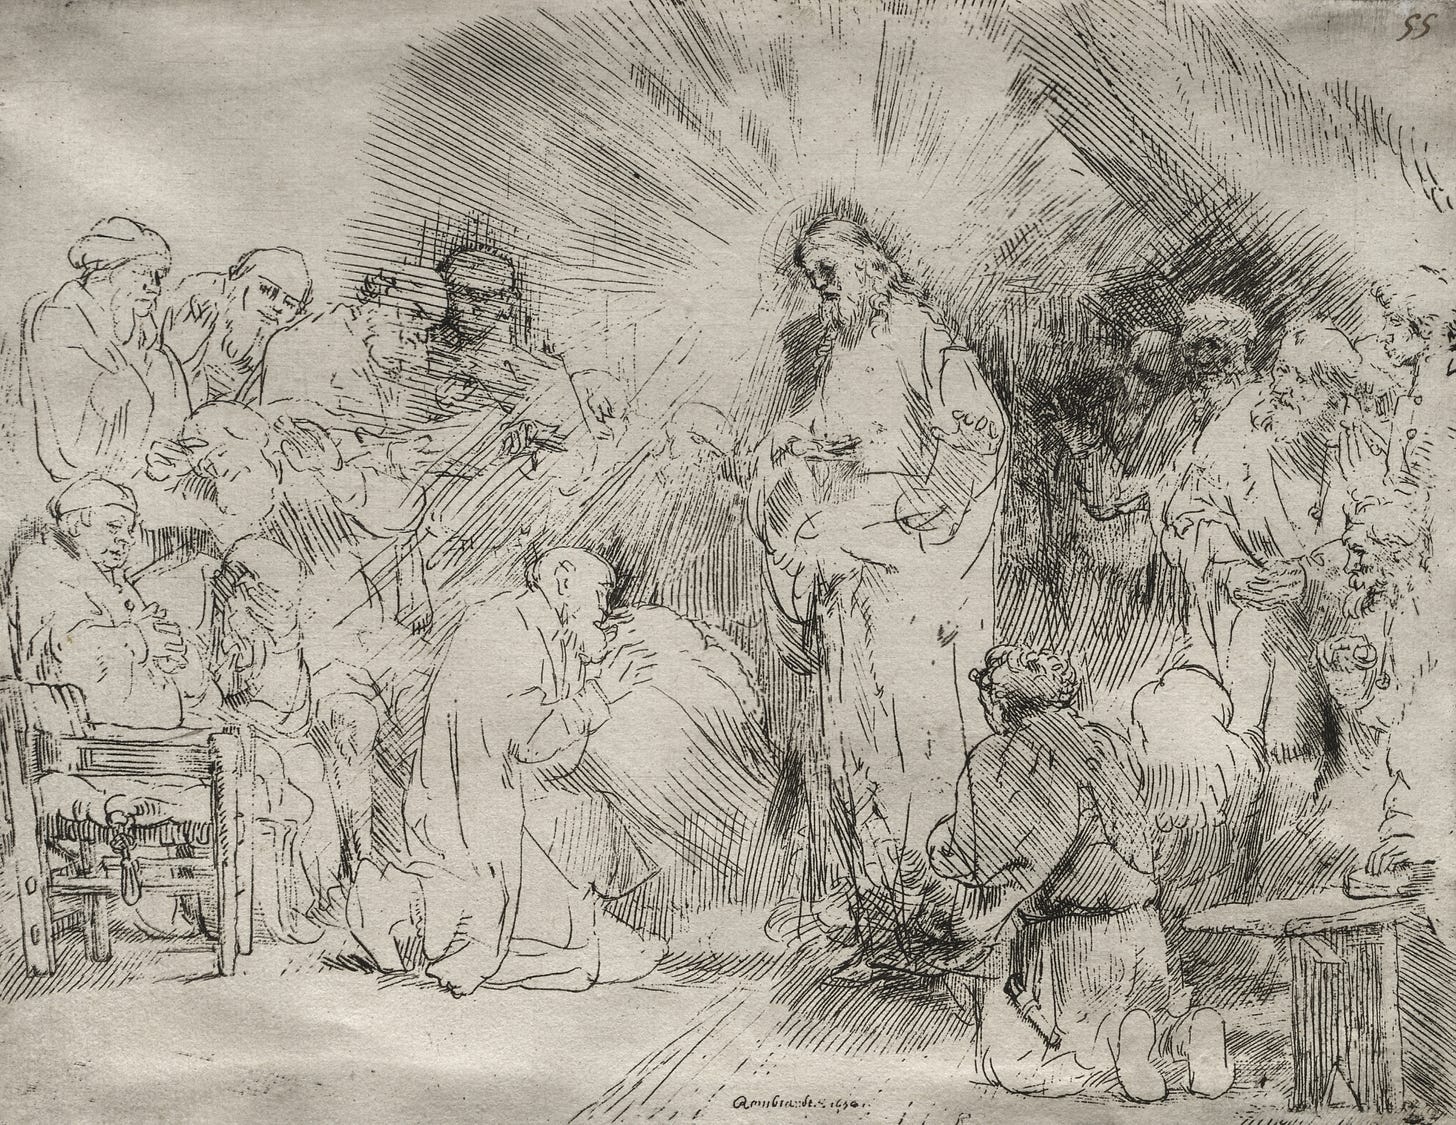 Christ Appearing to the Apostles (1656) by Rembrandt van Rijn